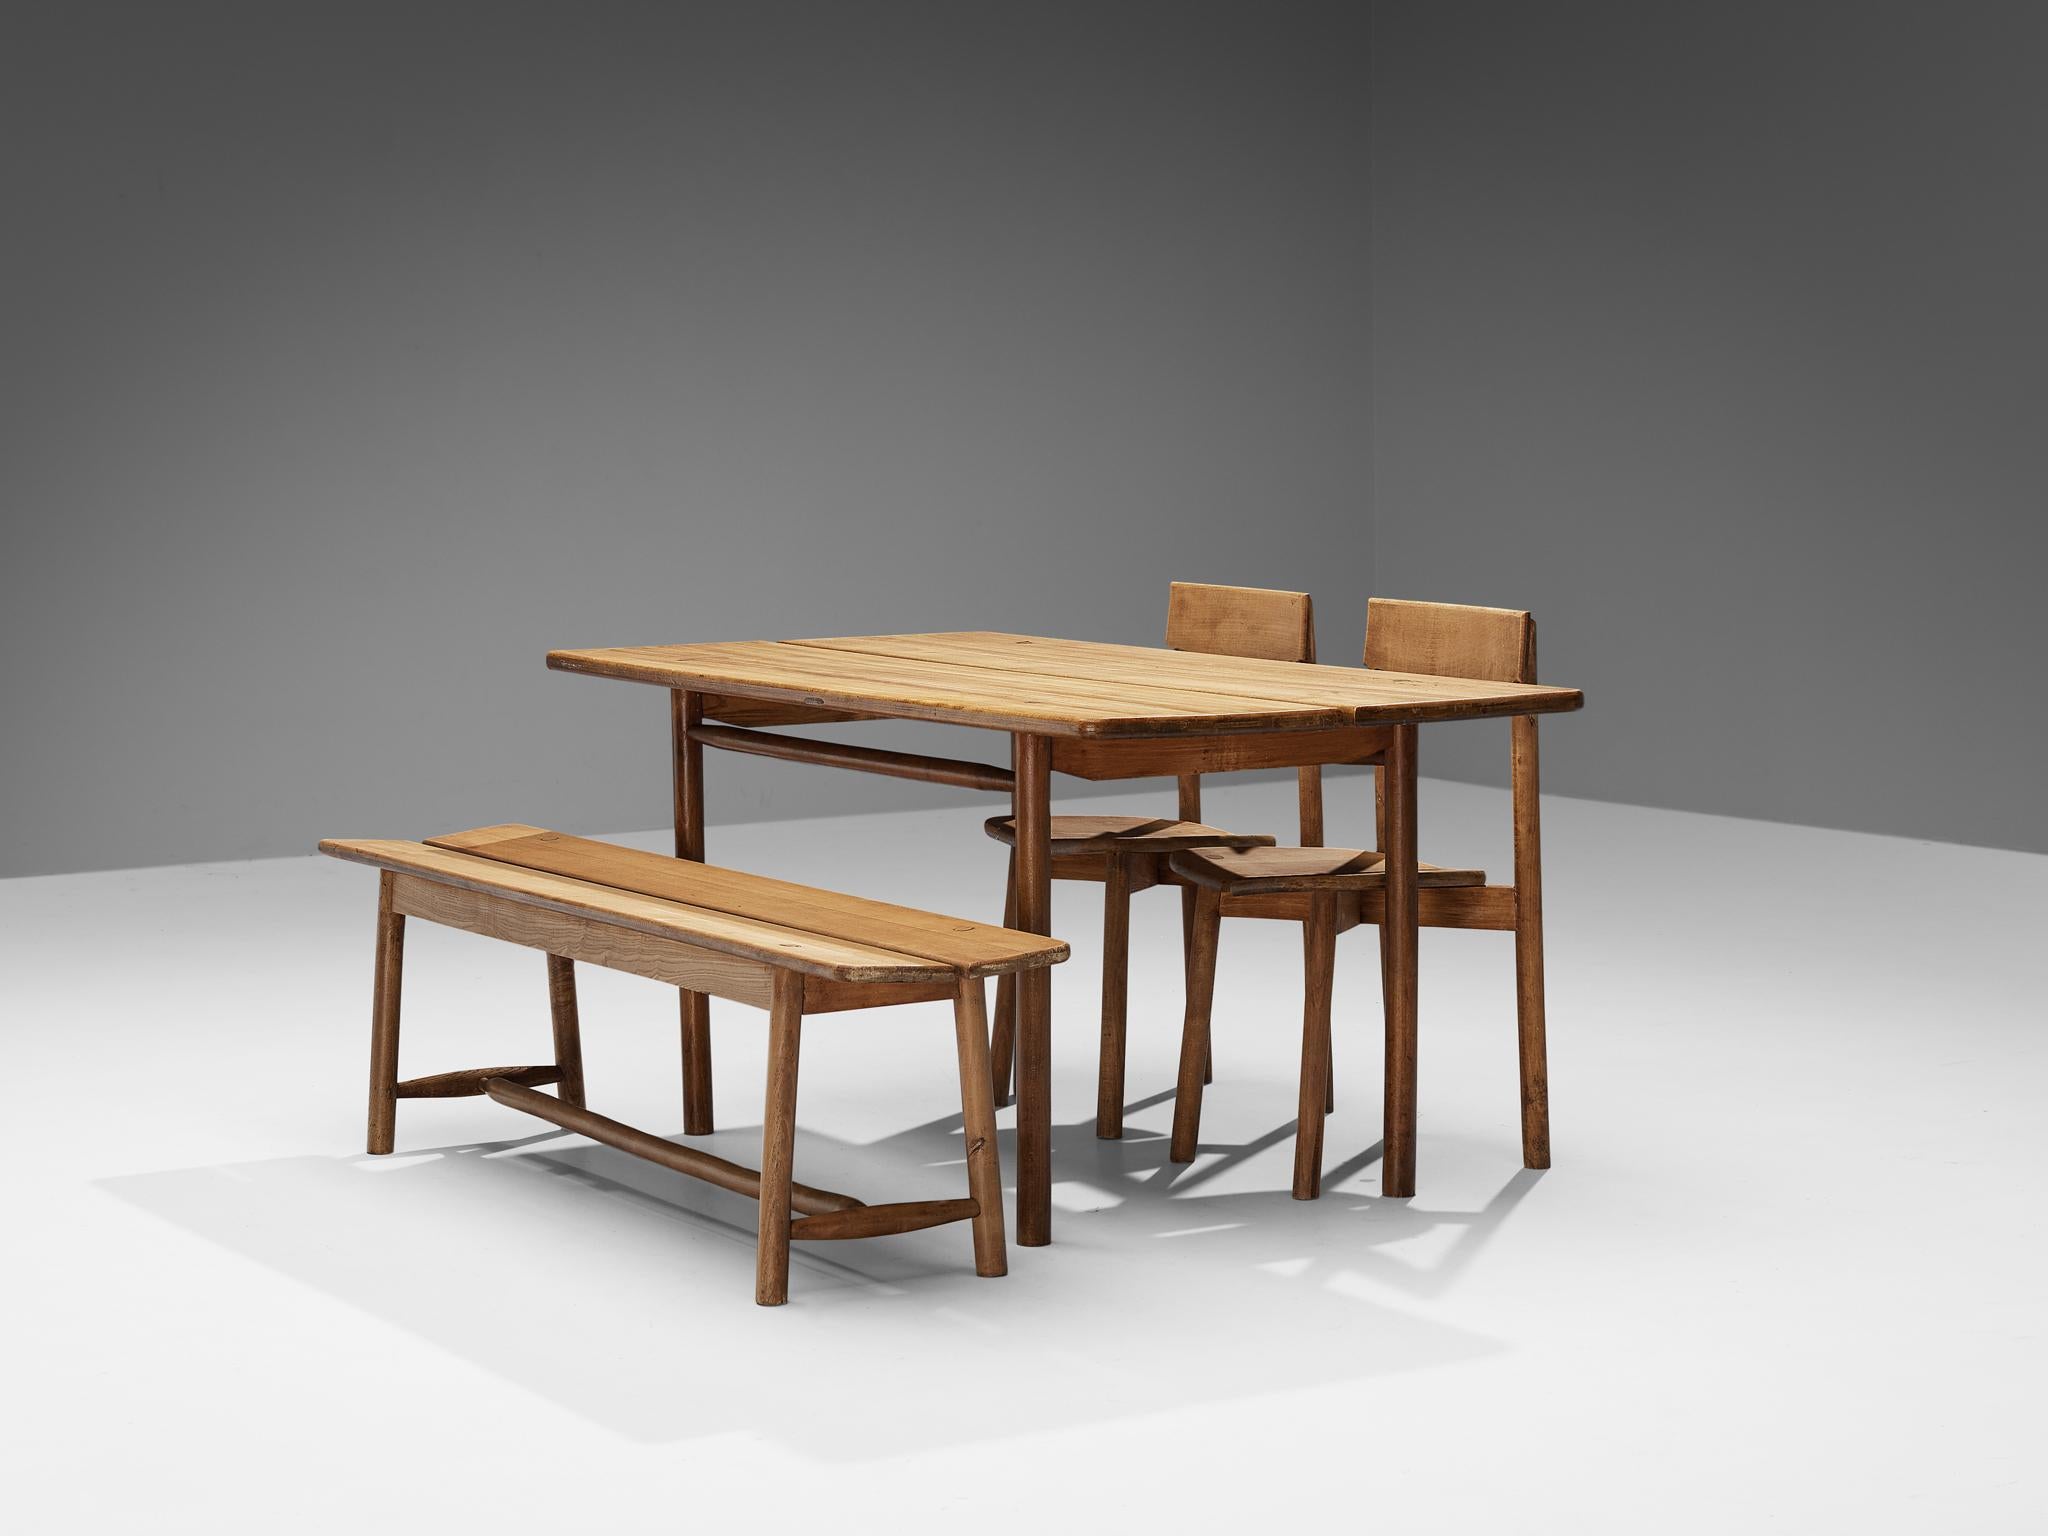 Pierre Gautier-Delaye, set of table with bench and chairs, solid beech, France, 1950s

Simplistic table with bench and chairs by French designer Pierre Gautier-Delaye. The sleek design shows beautiful lines, which are clearly emphasized by the open